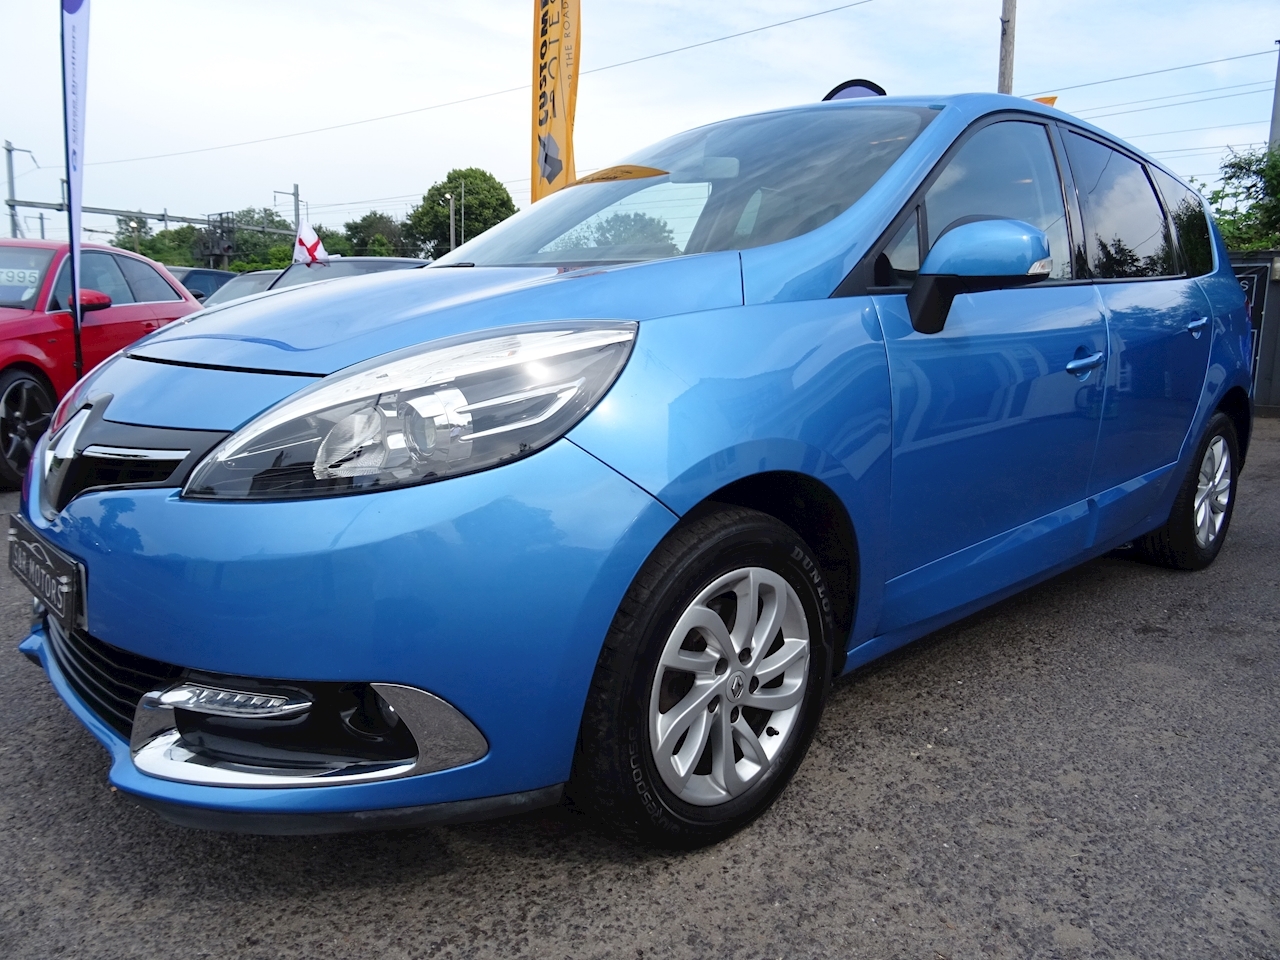 1.5 dCi Dynamique TomTom MPV 5dr Diesel Manual (s/s) (105 g/km, 110 bhp)